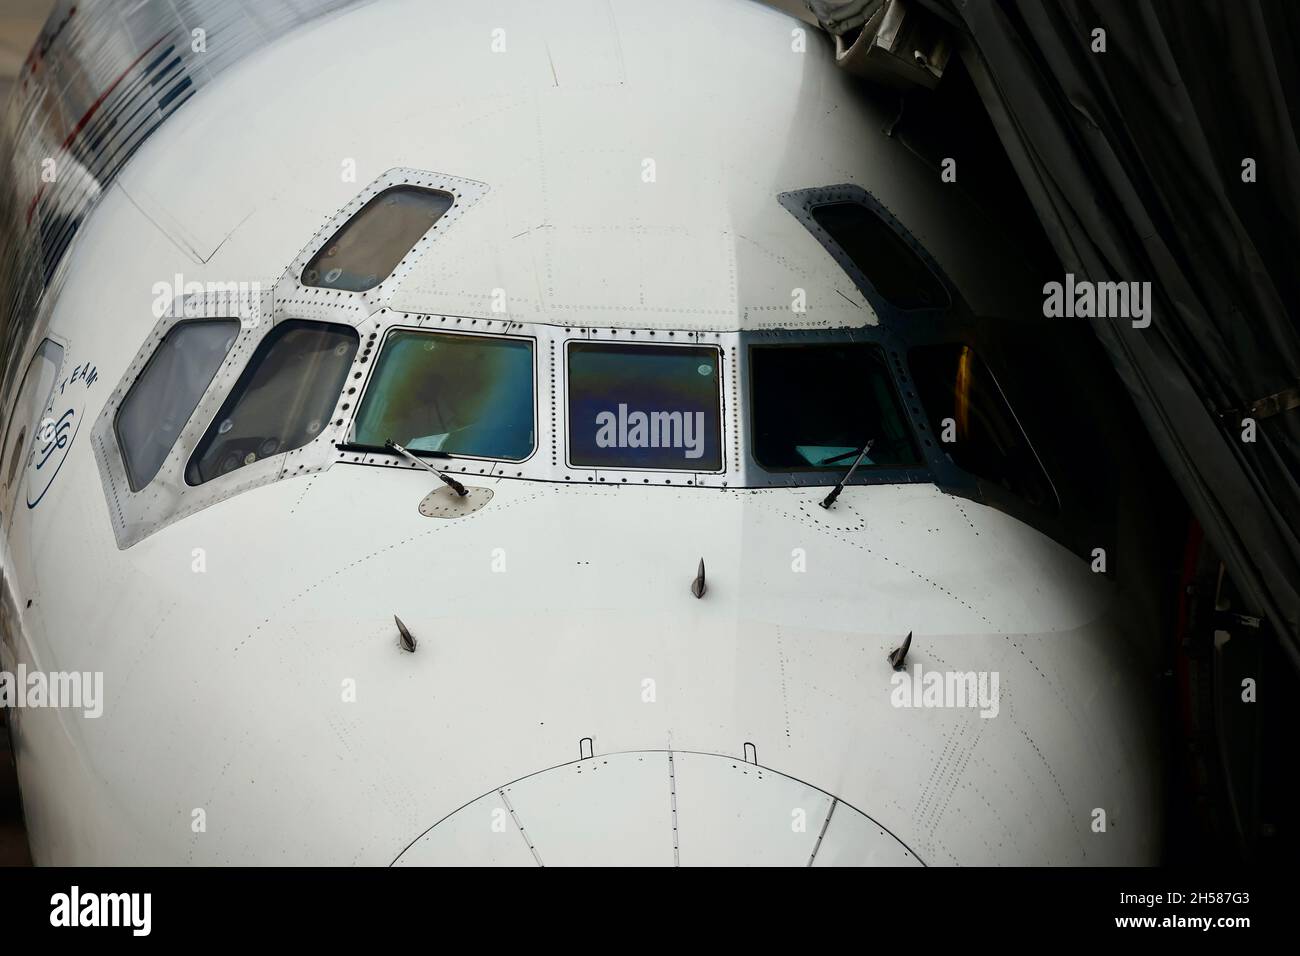 A close-up view of the front of a 747 airplane Stock Photo